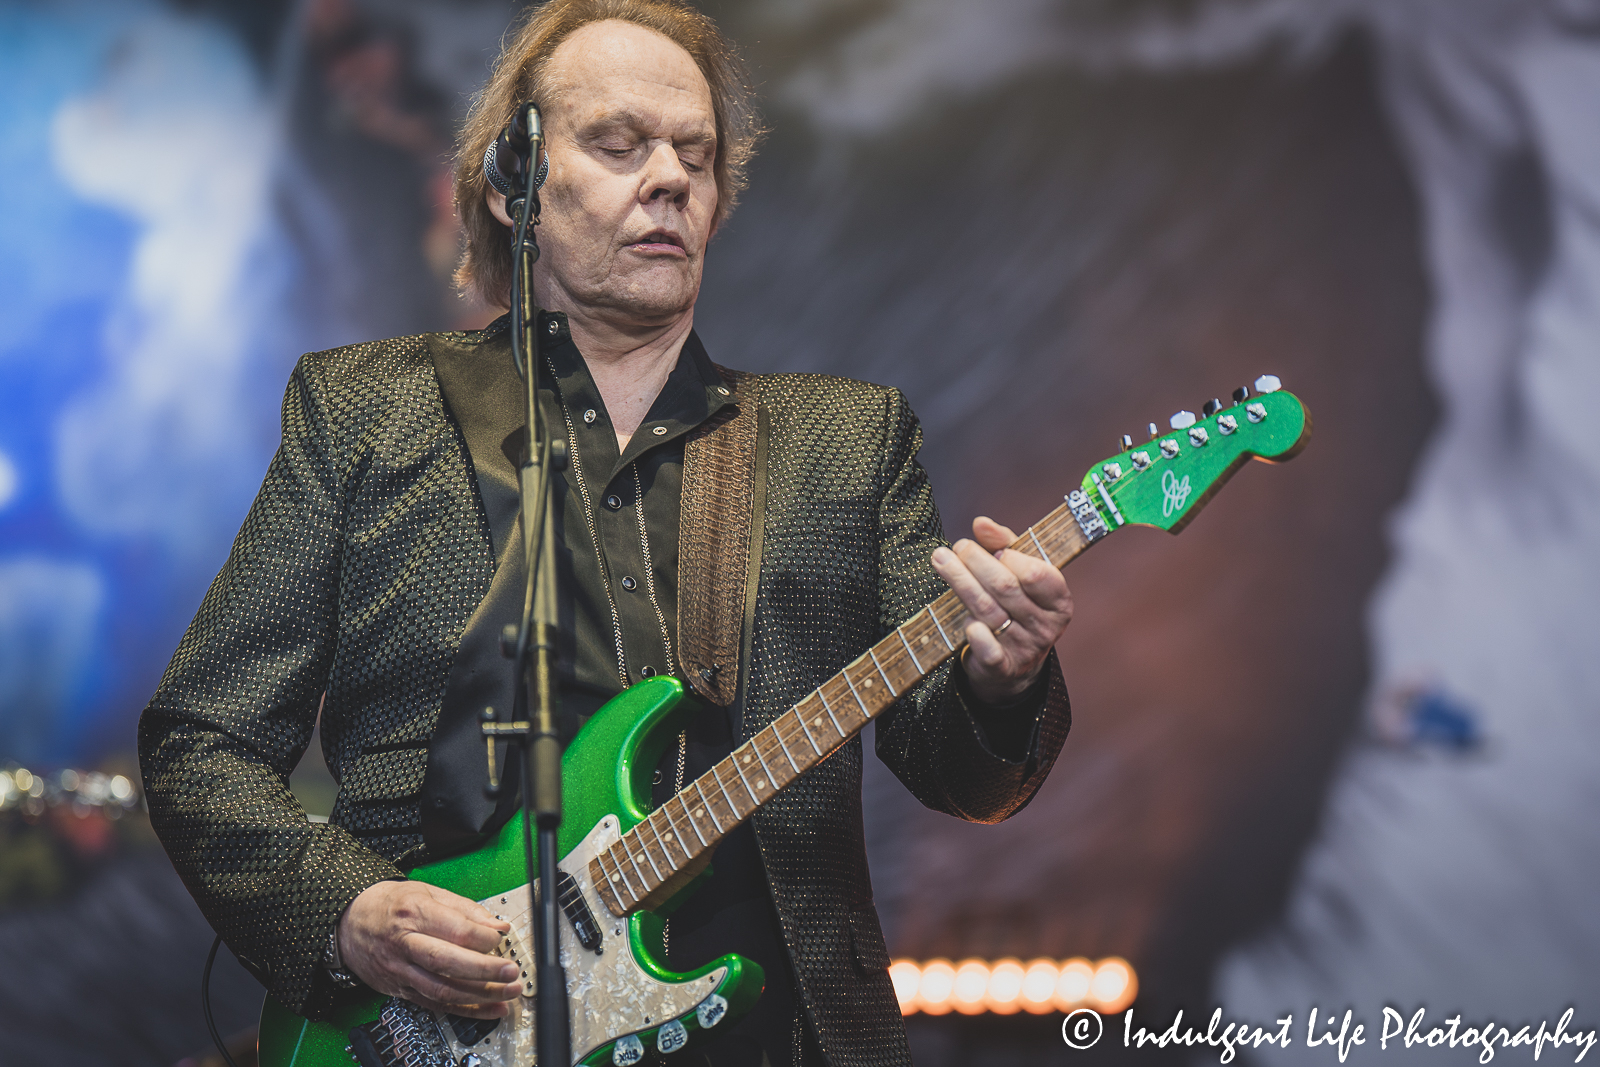 Styx frontman and guitarist James "J.Y." Young performing live in concert at Starlight Theatre in Kansas City, MO on June 14, 2022.